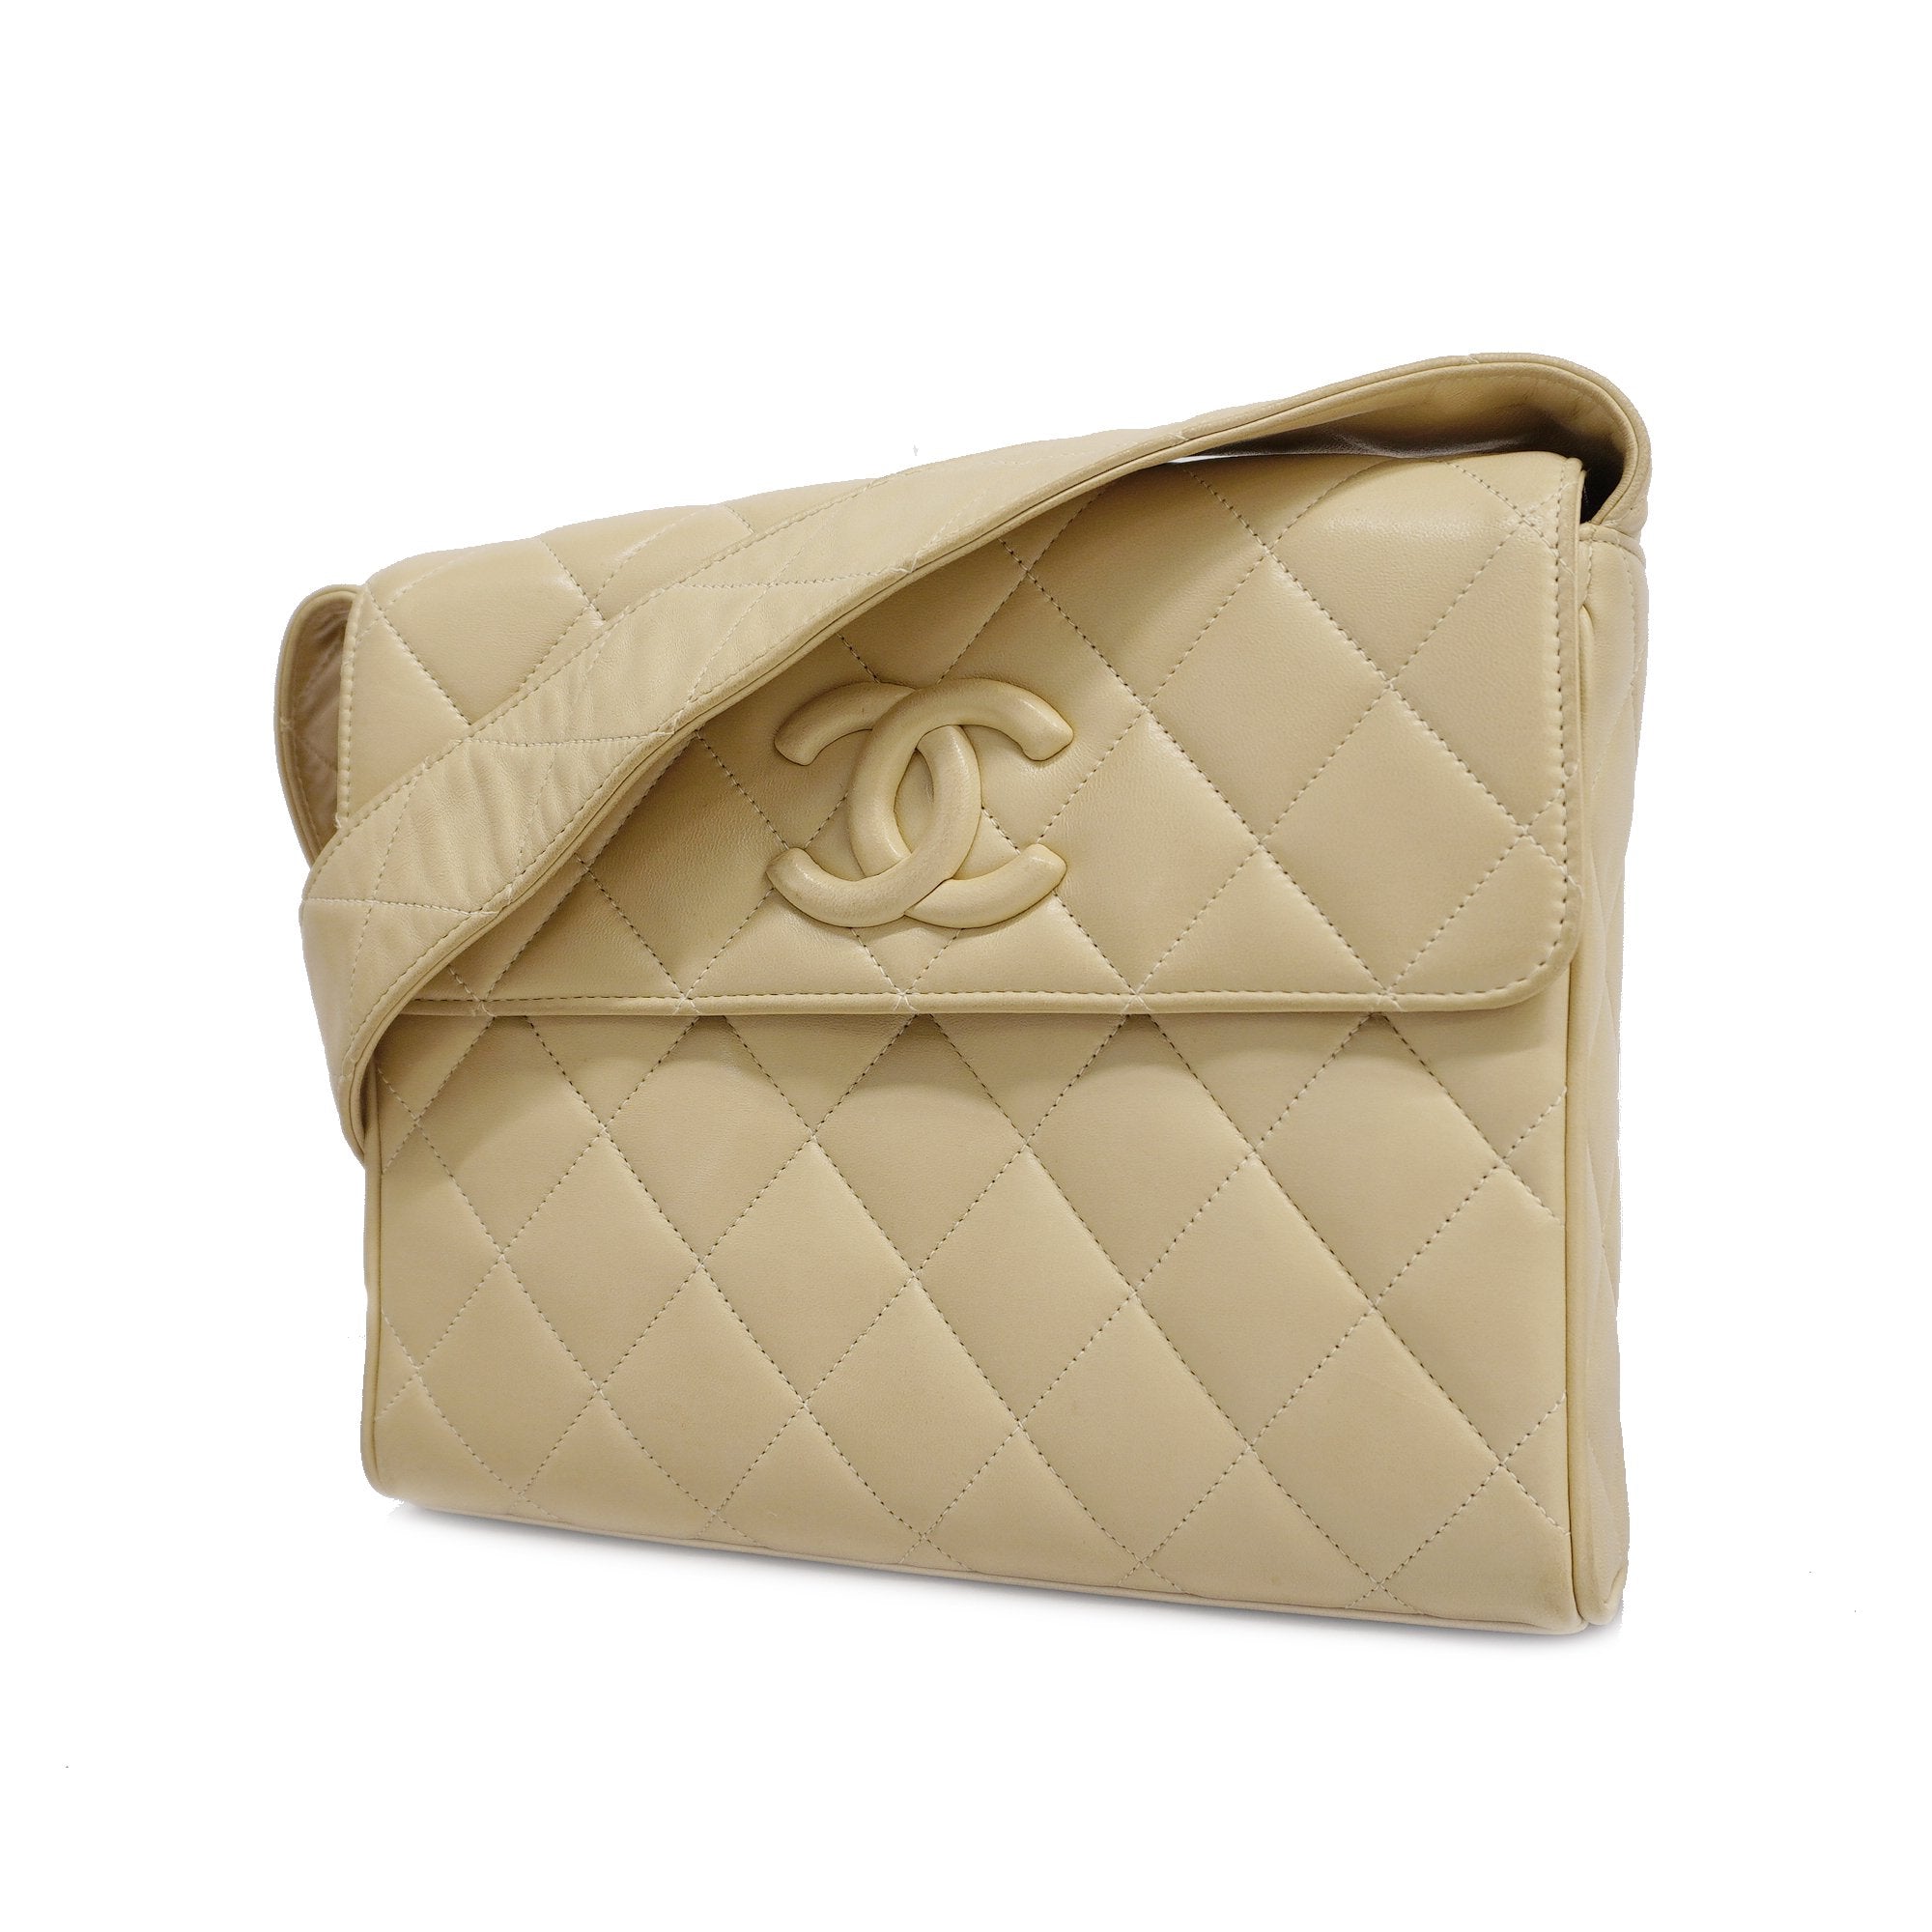 Chanel AS3932 Flap Classic Bag CF Lambskin White Gold - lushenticbags